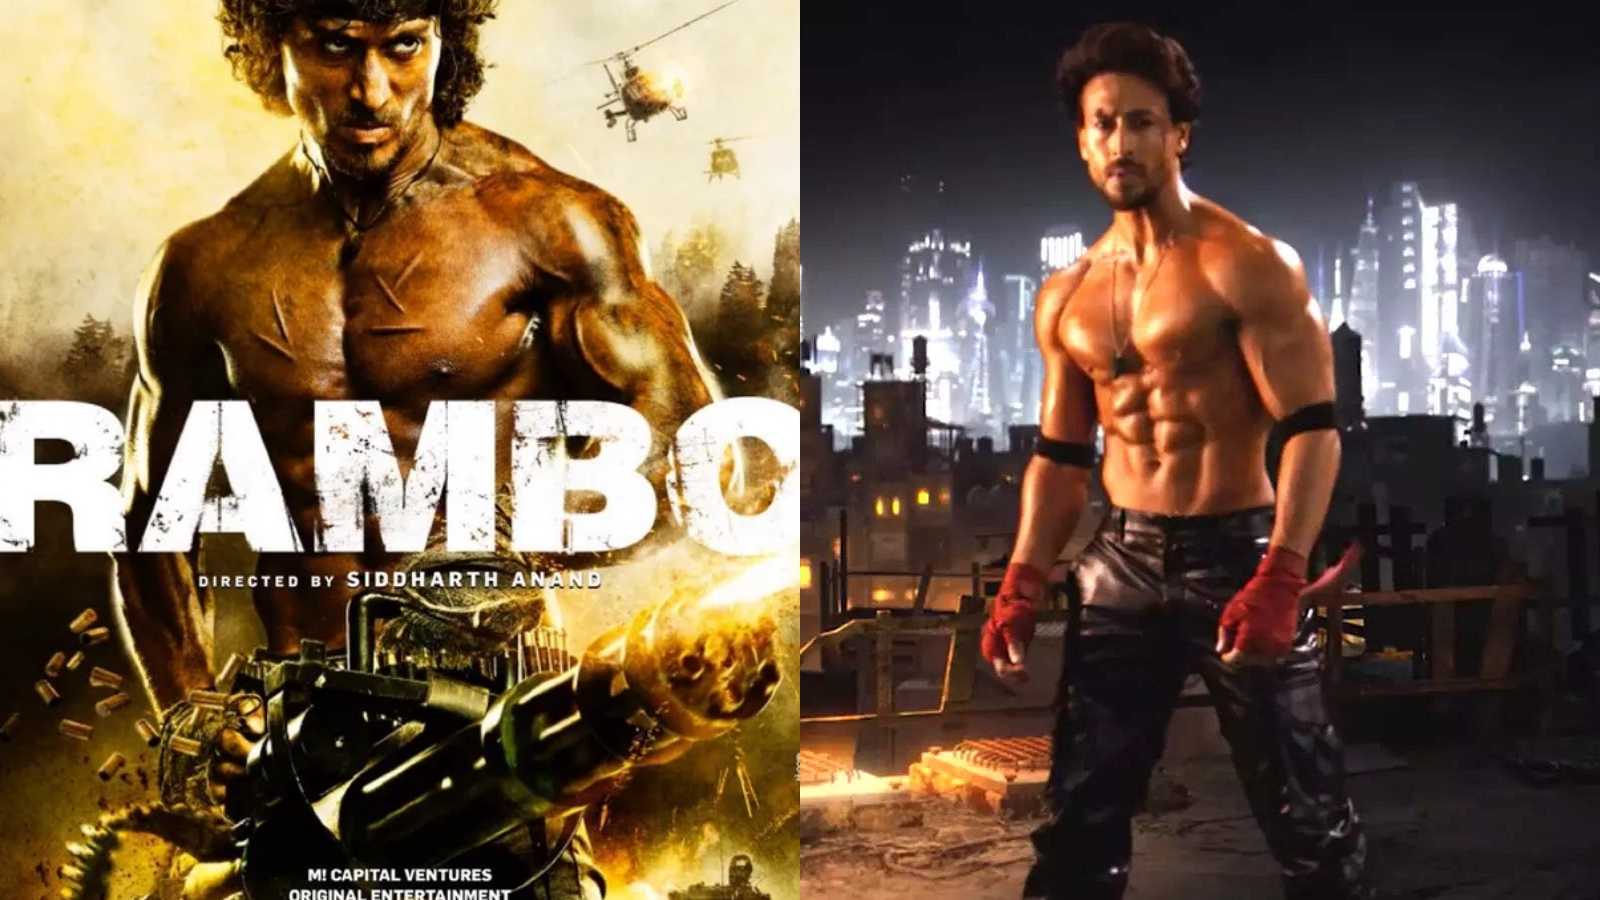 Post Heropanti 2, Tiger Shroff gets ready for an interesting schedule of Ganapath, to begin prep for Rambo after